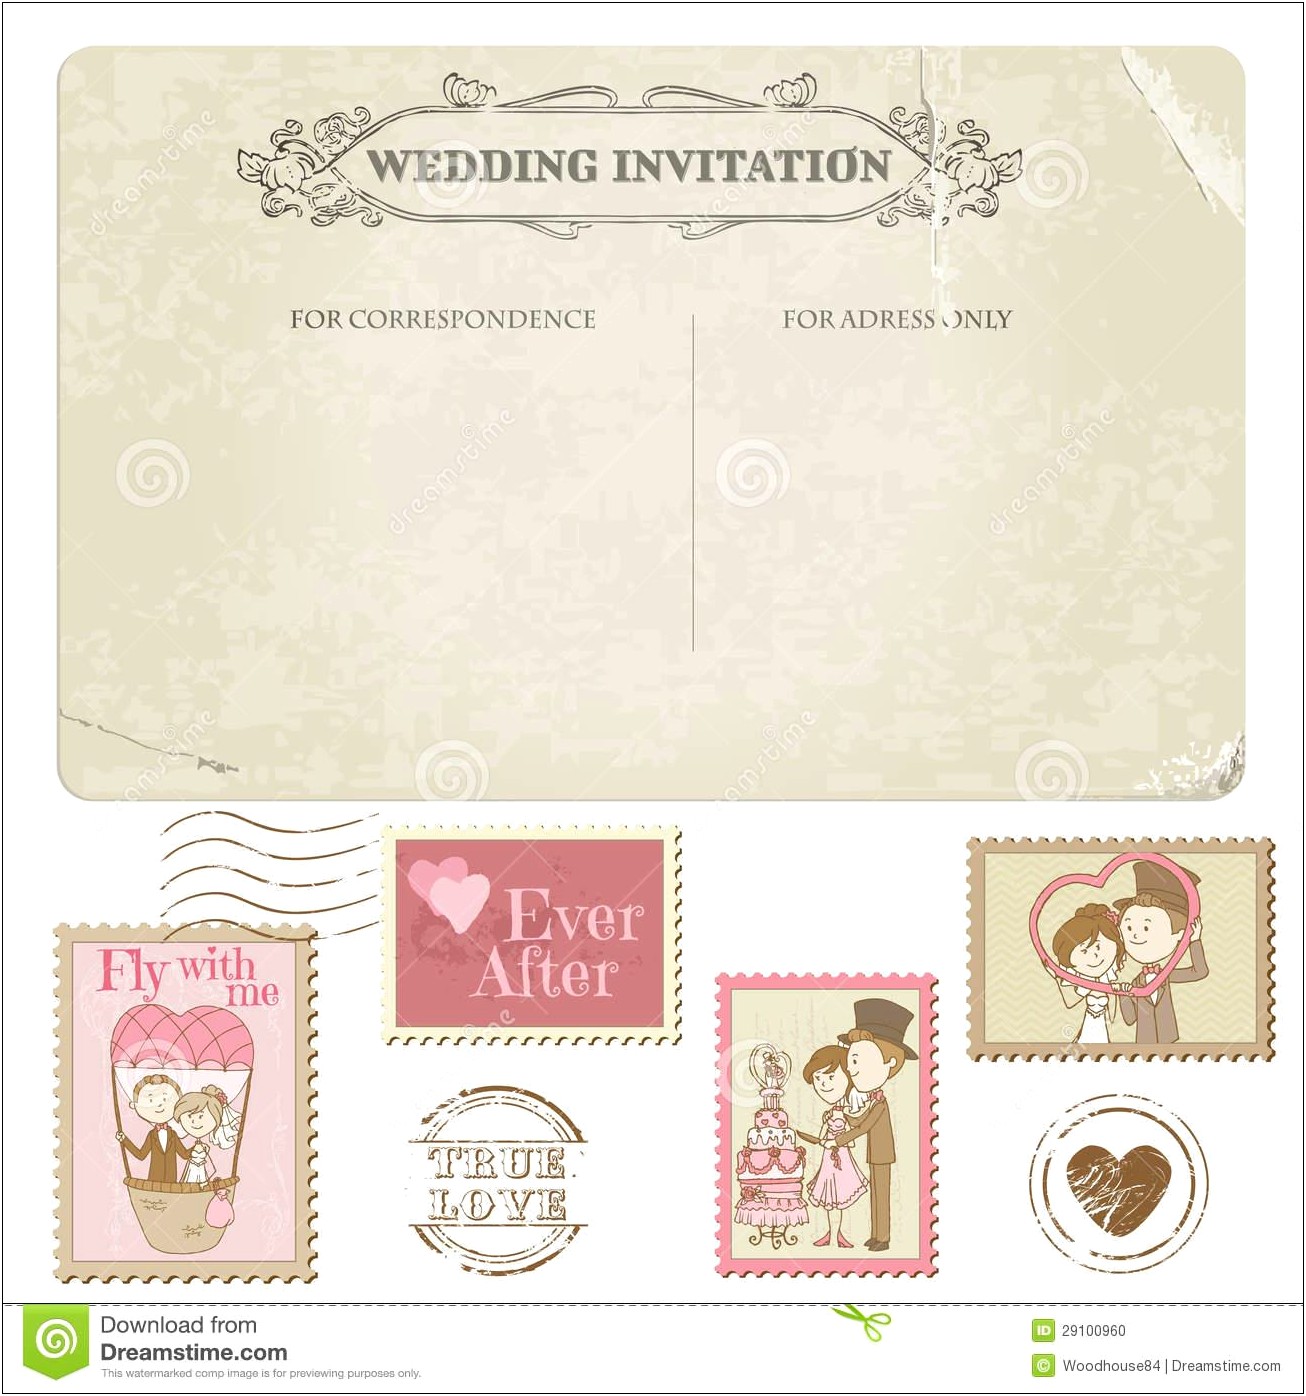 Cheap Wedding Postage Stamps For Invitations